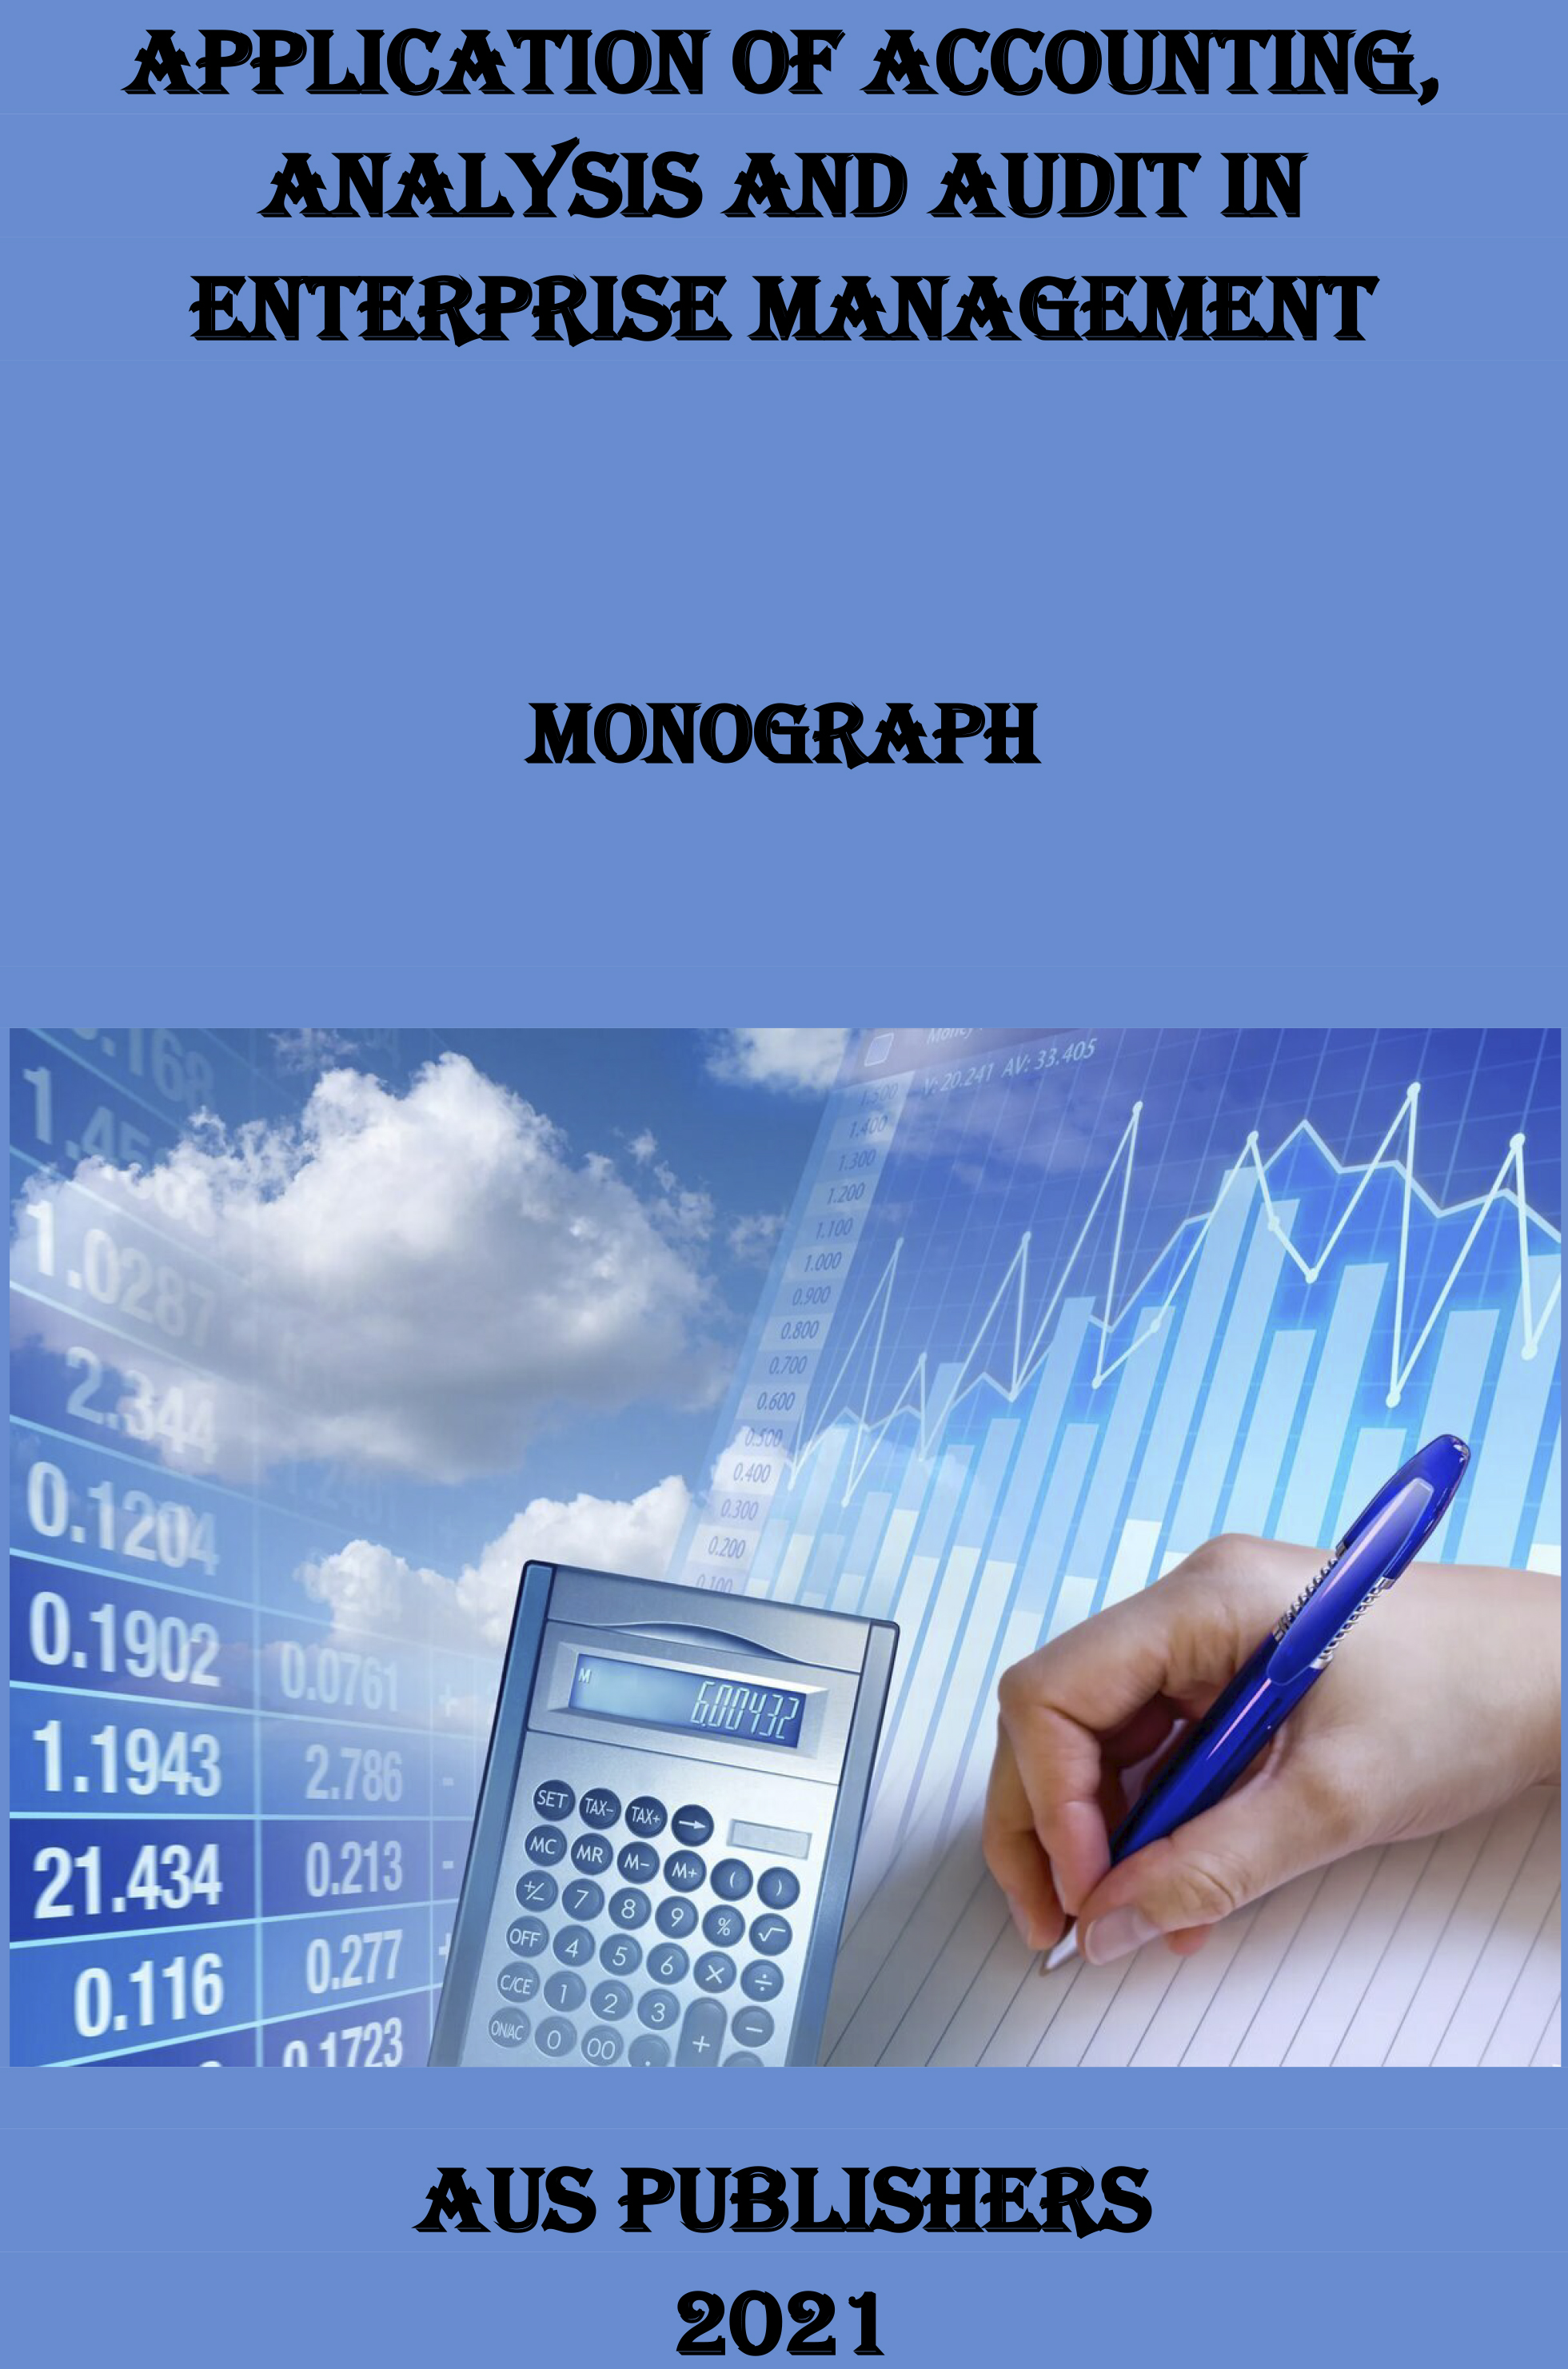                         Study and valuation of an enterprise based on management accounting
            